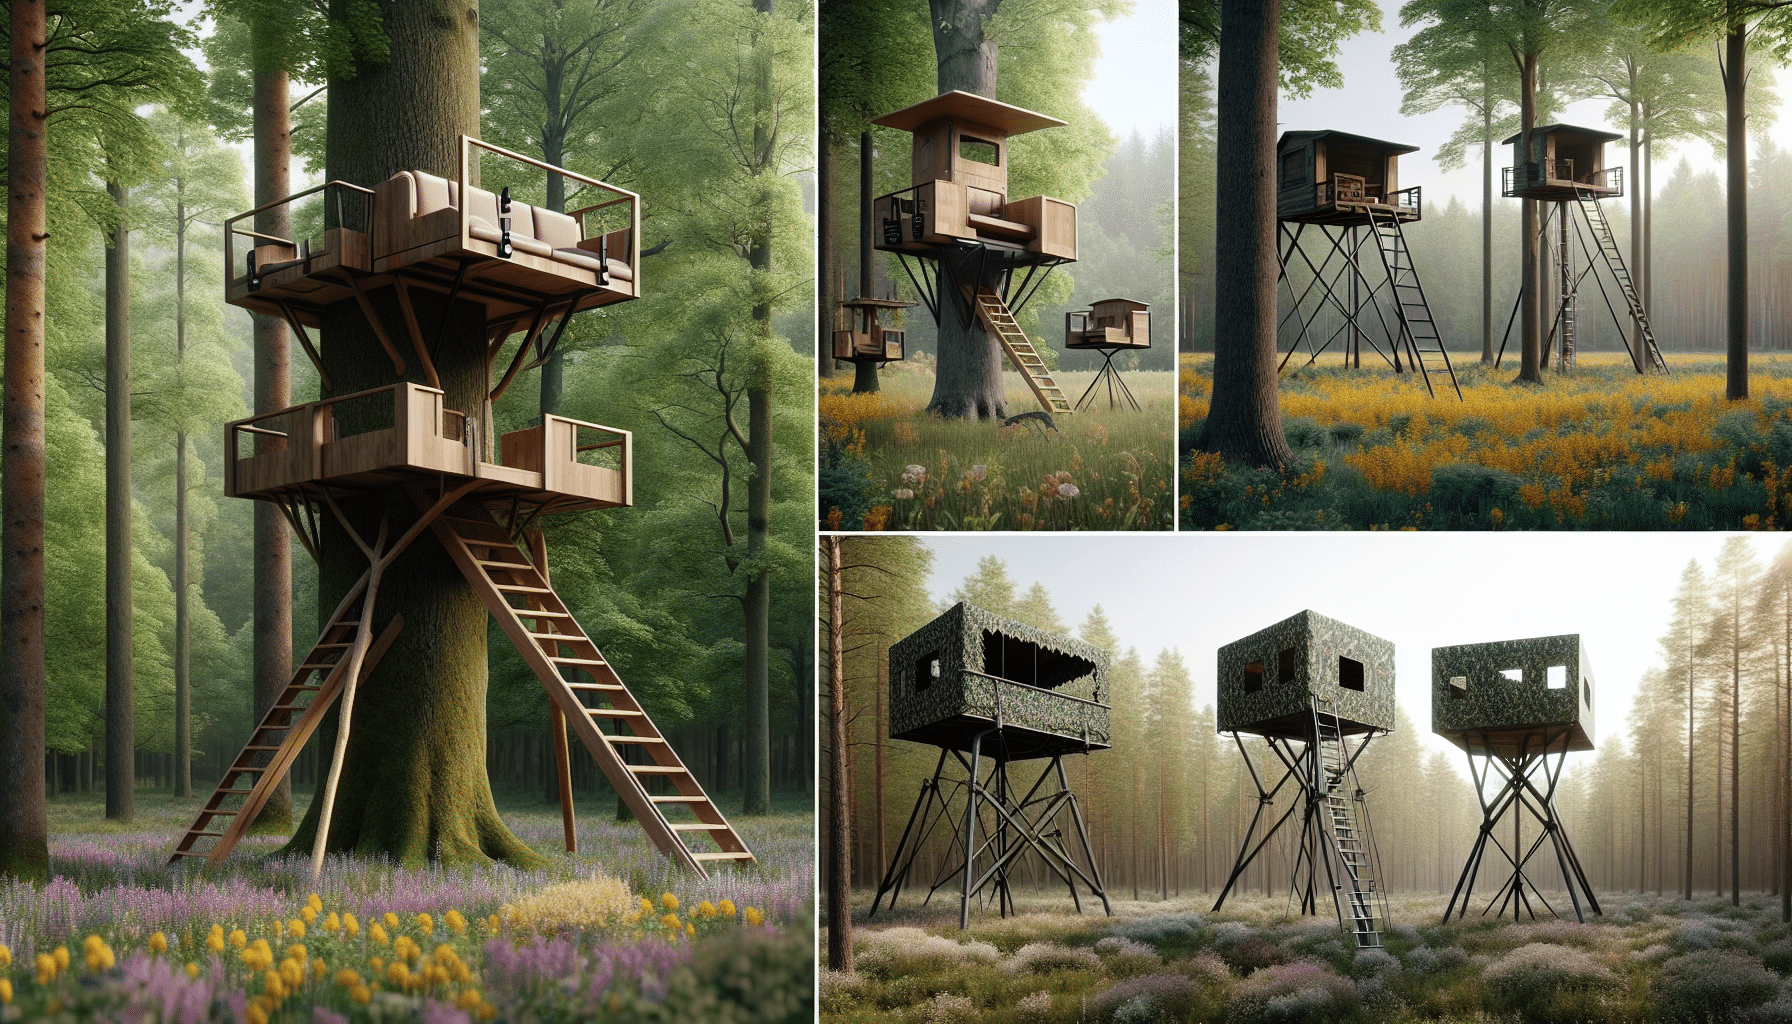 A display of several deer stands in a beautiful forest setting during the month of April. In the foreground, showcase a stand manufactured from sturdy wood, elevated and designed for one person, offering a comfortable seat with safety harness. It overlooks the patch of wildflowers. Another deer stand in the background is an elaborate treehouse-style stand with a stairway leading up into it. It's nestled in the lush foliage of a towering tree, displaying its enhanced vantage point. The third stand, to the right, is a minimalist design made from metal, structured with sleek lines it blends subtly into the surroundings. The fourth stand, hidden amidst the forest, is a camouflage tent-style stand. All stands are devoid of persons, text, logos or brand names.